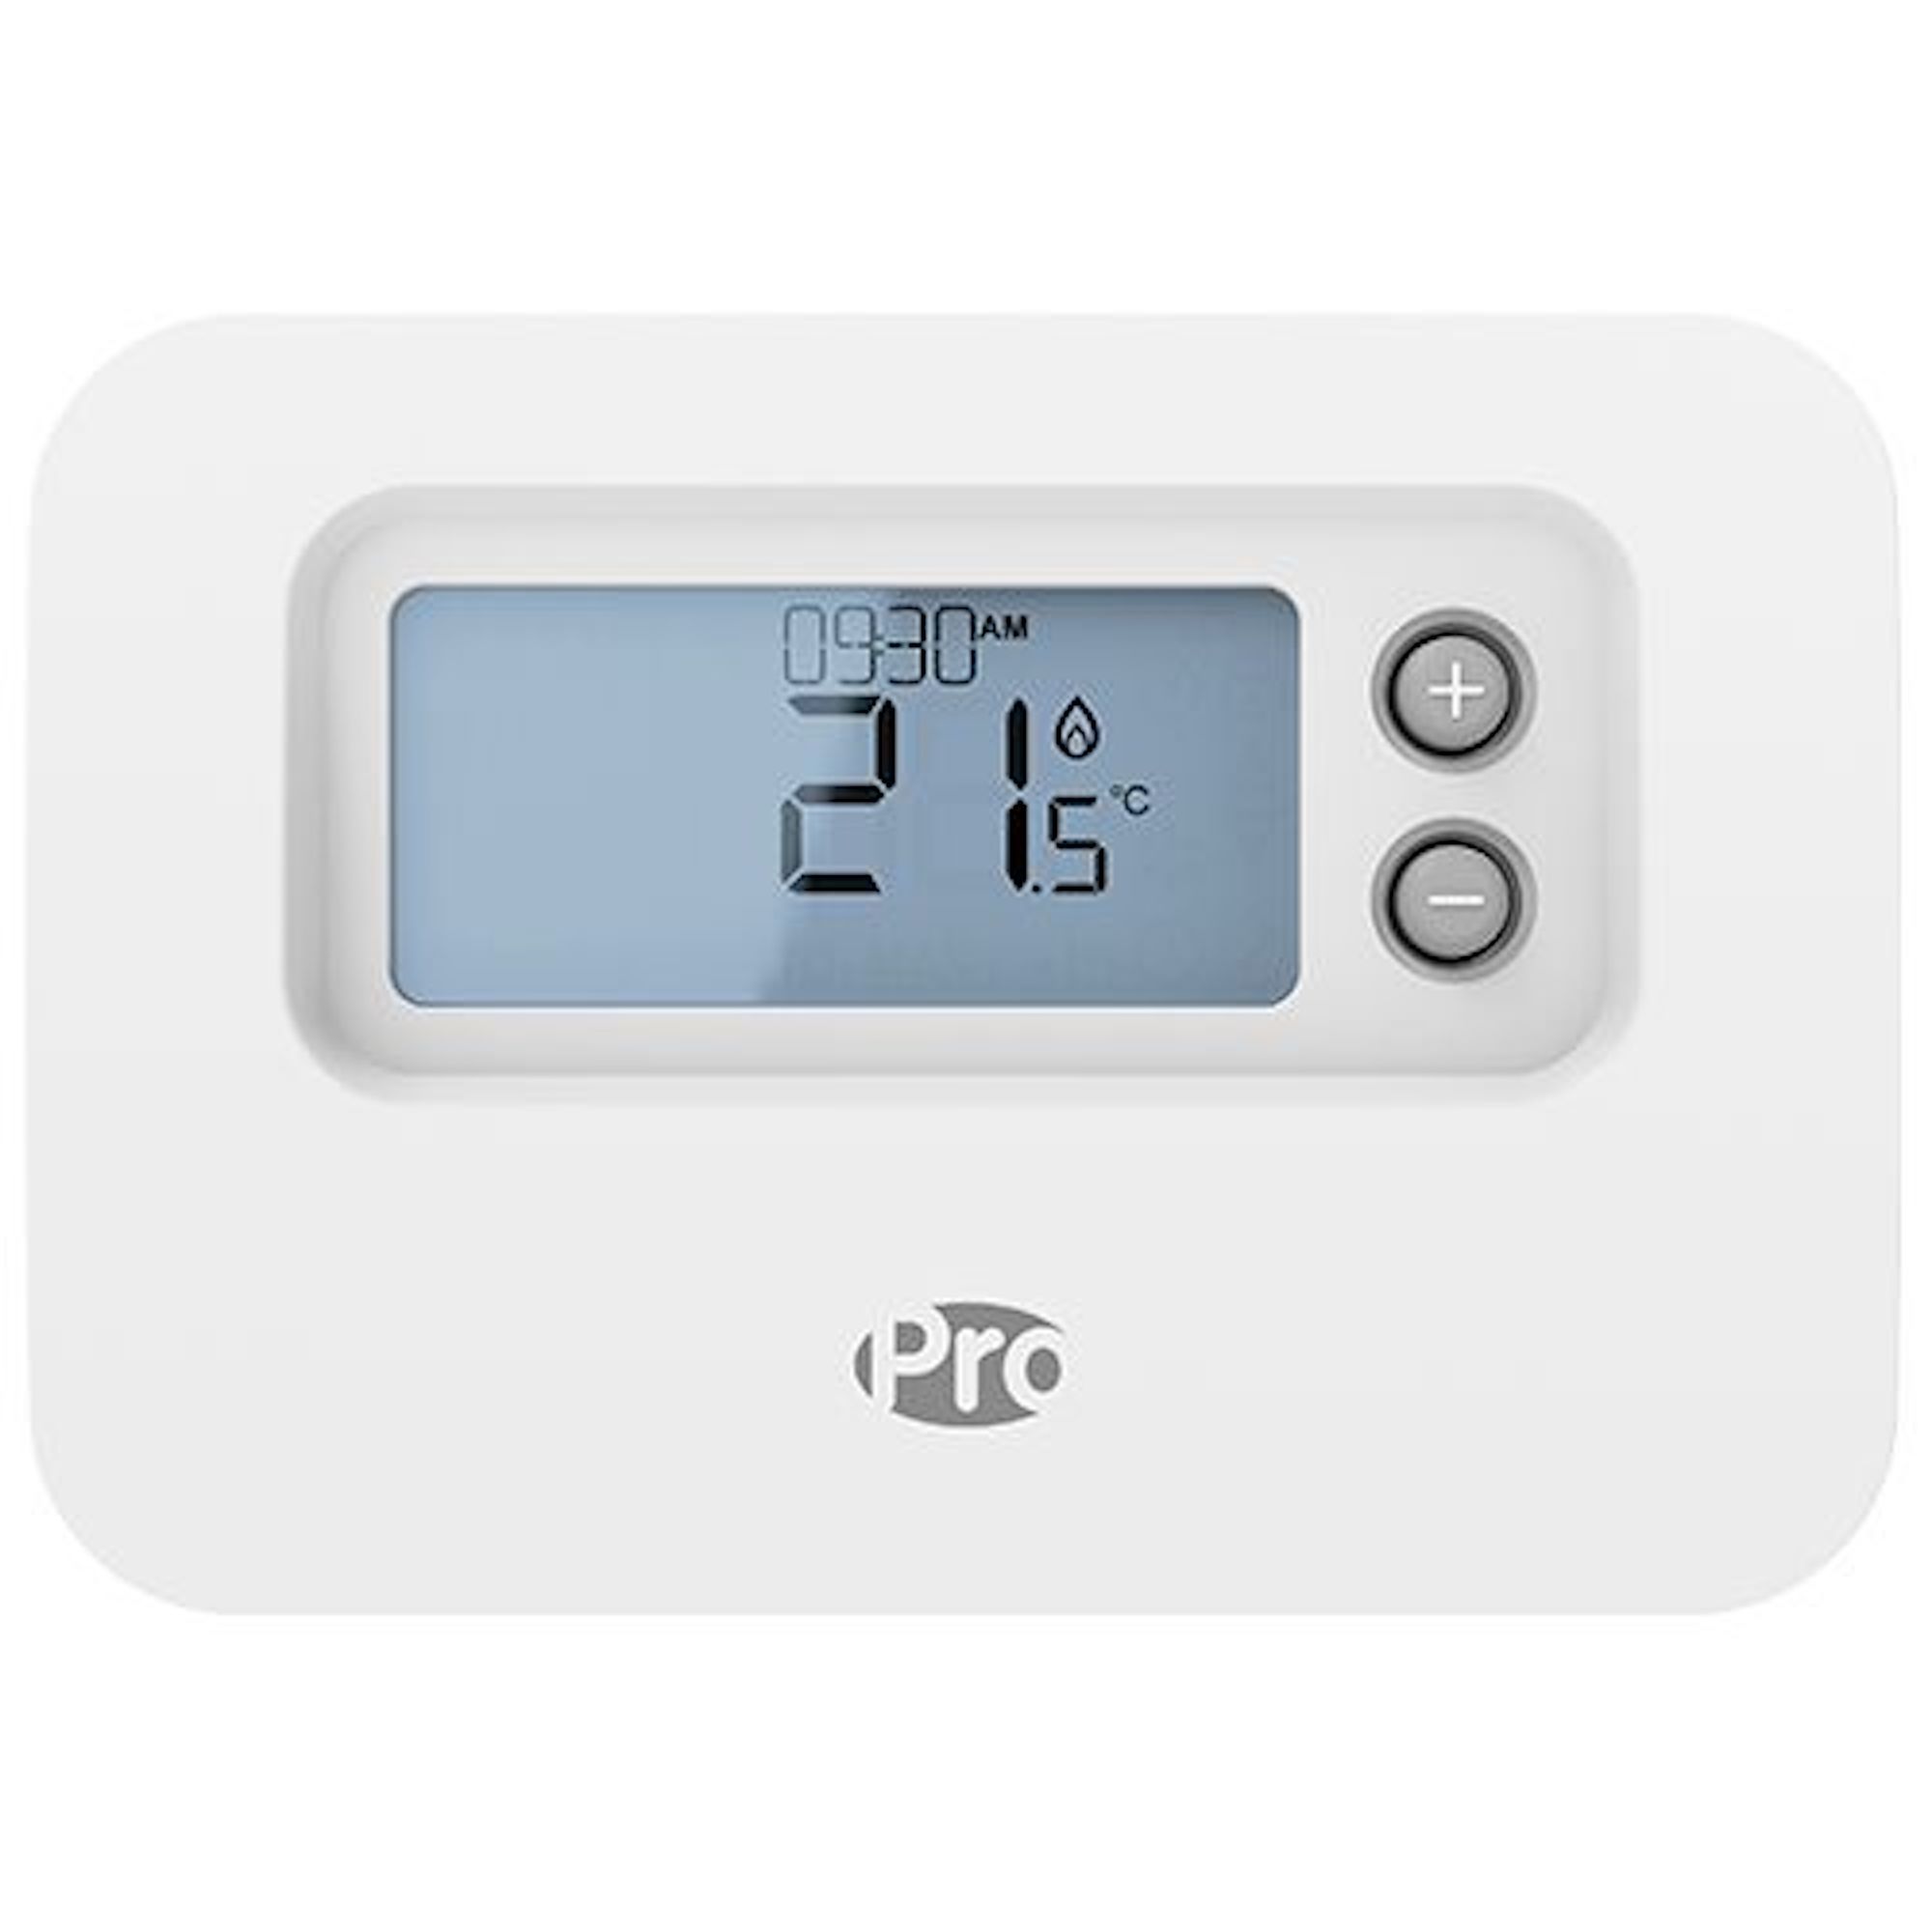 Pro Wired Programmable Thermostat - FPP15206